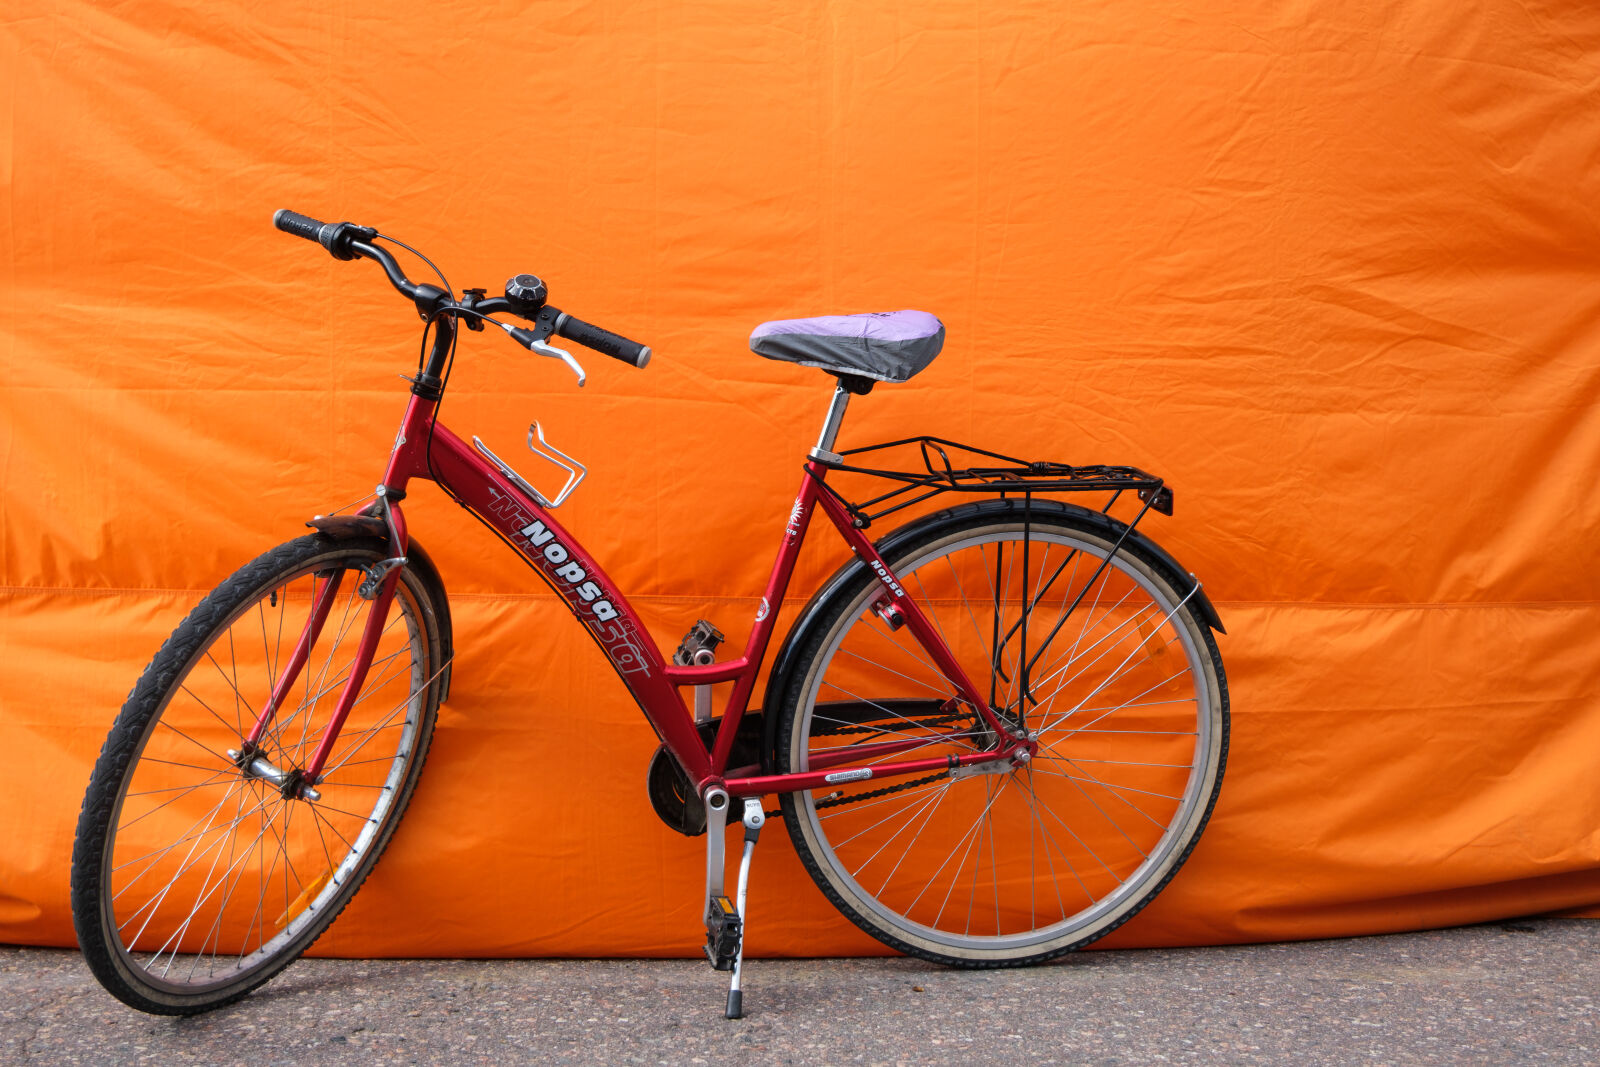 Fujifilm X-S20 sample photo. Bicycle by the marketplace photography